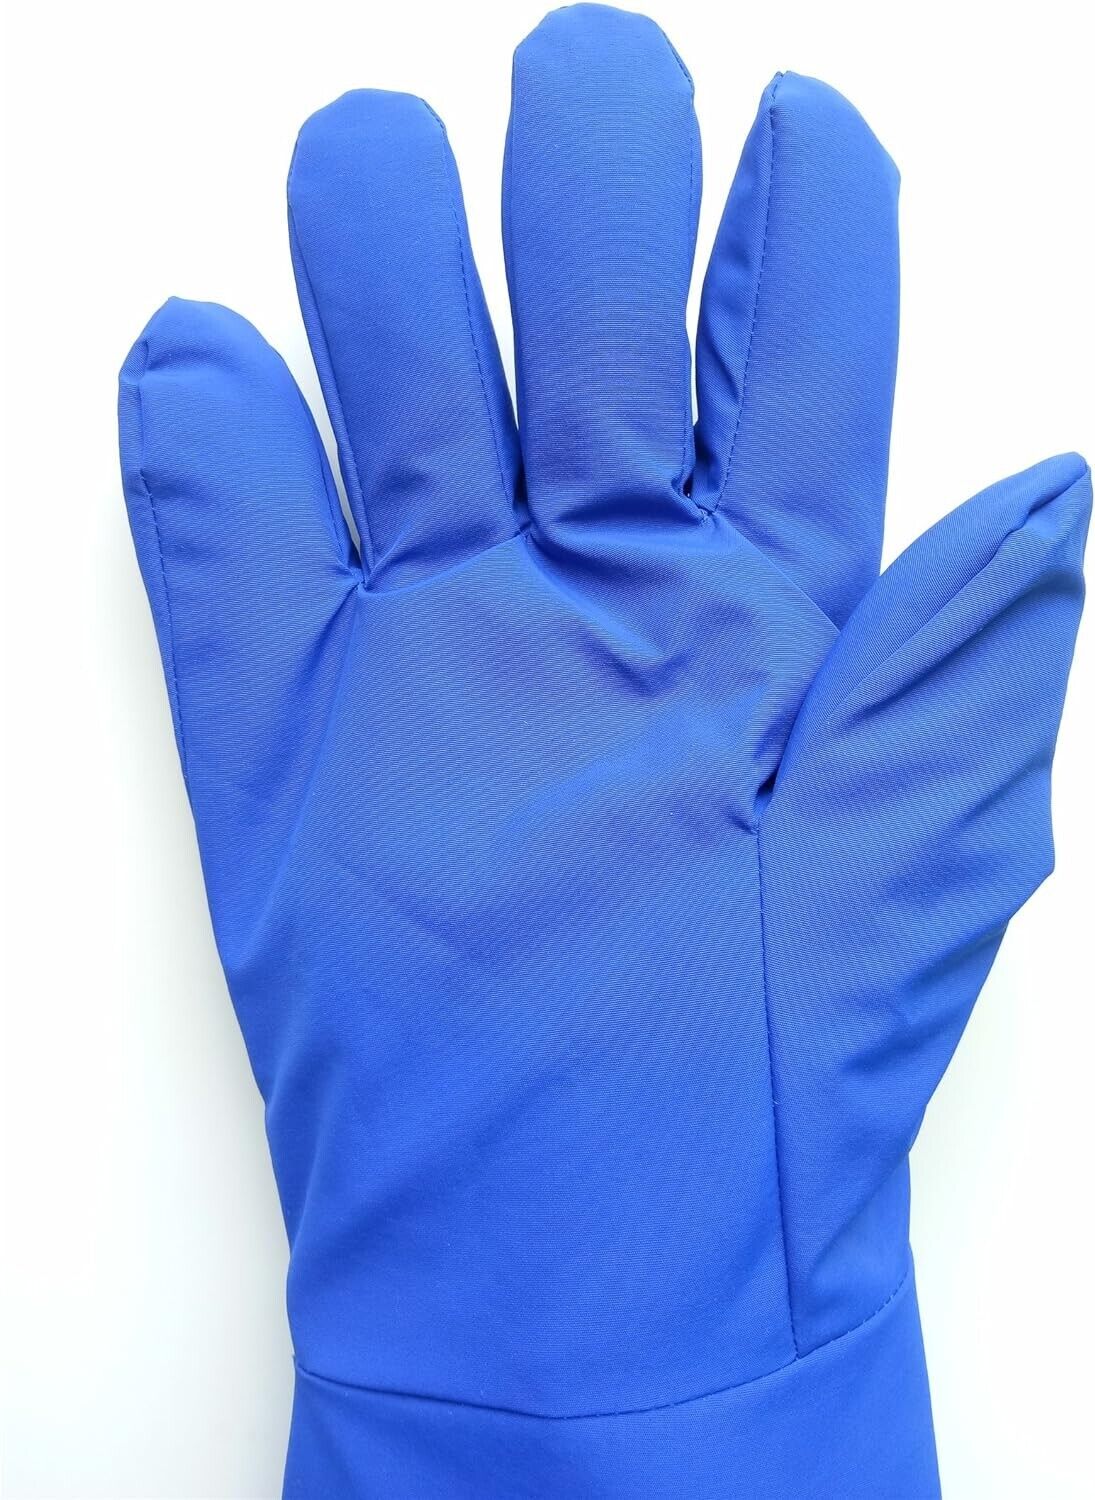 Cryogenic Low-Temperature Gloves